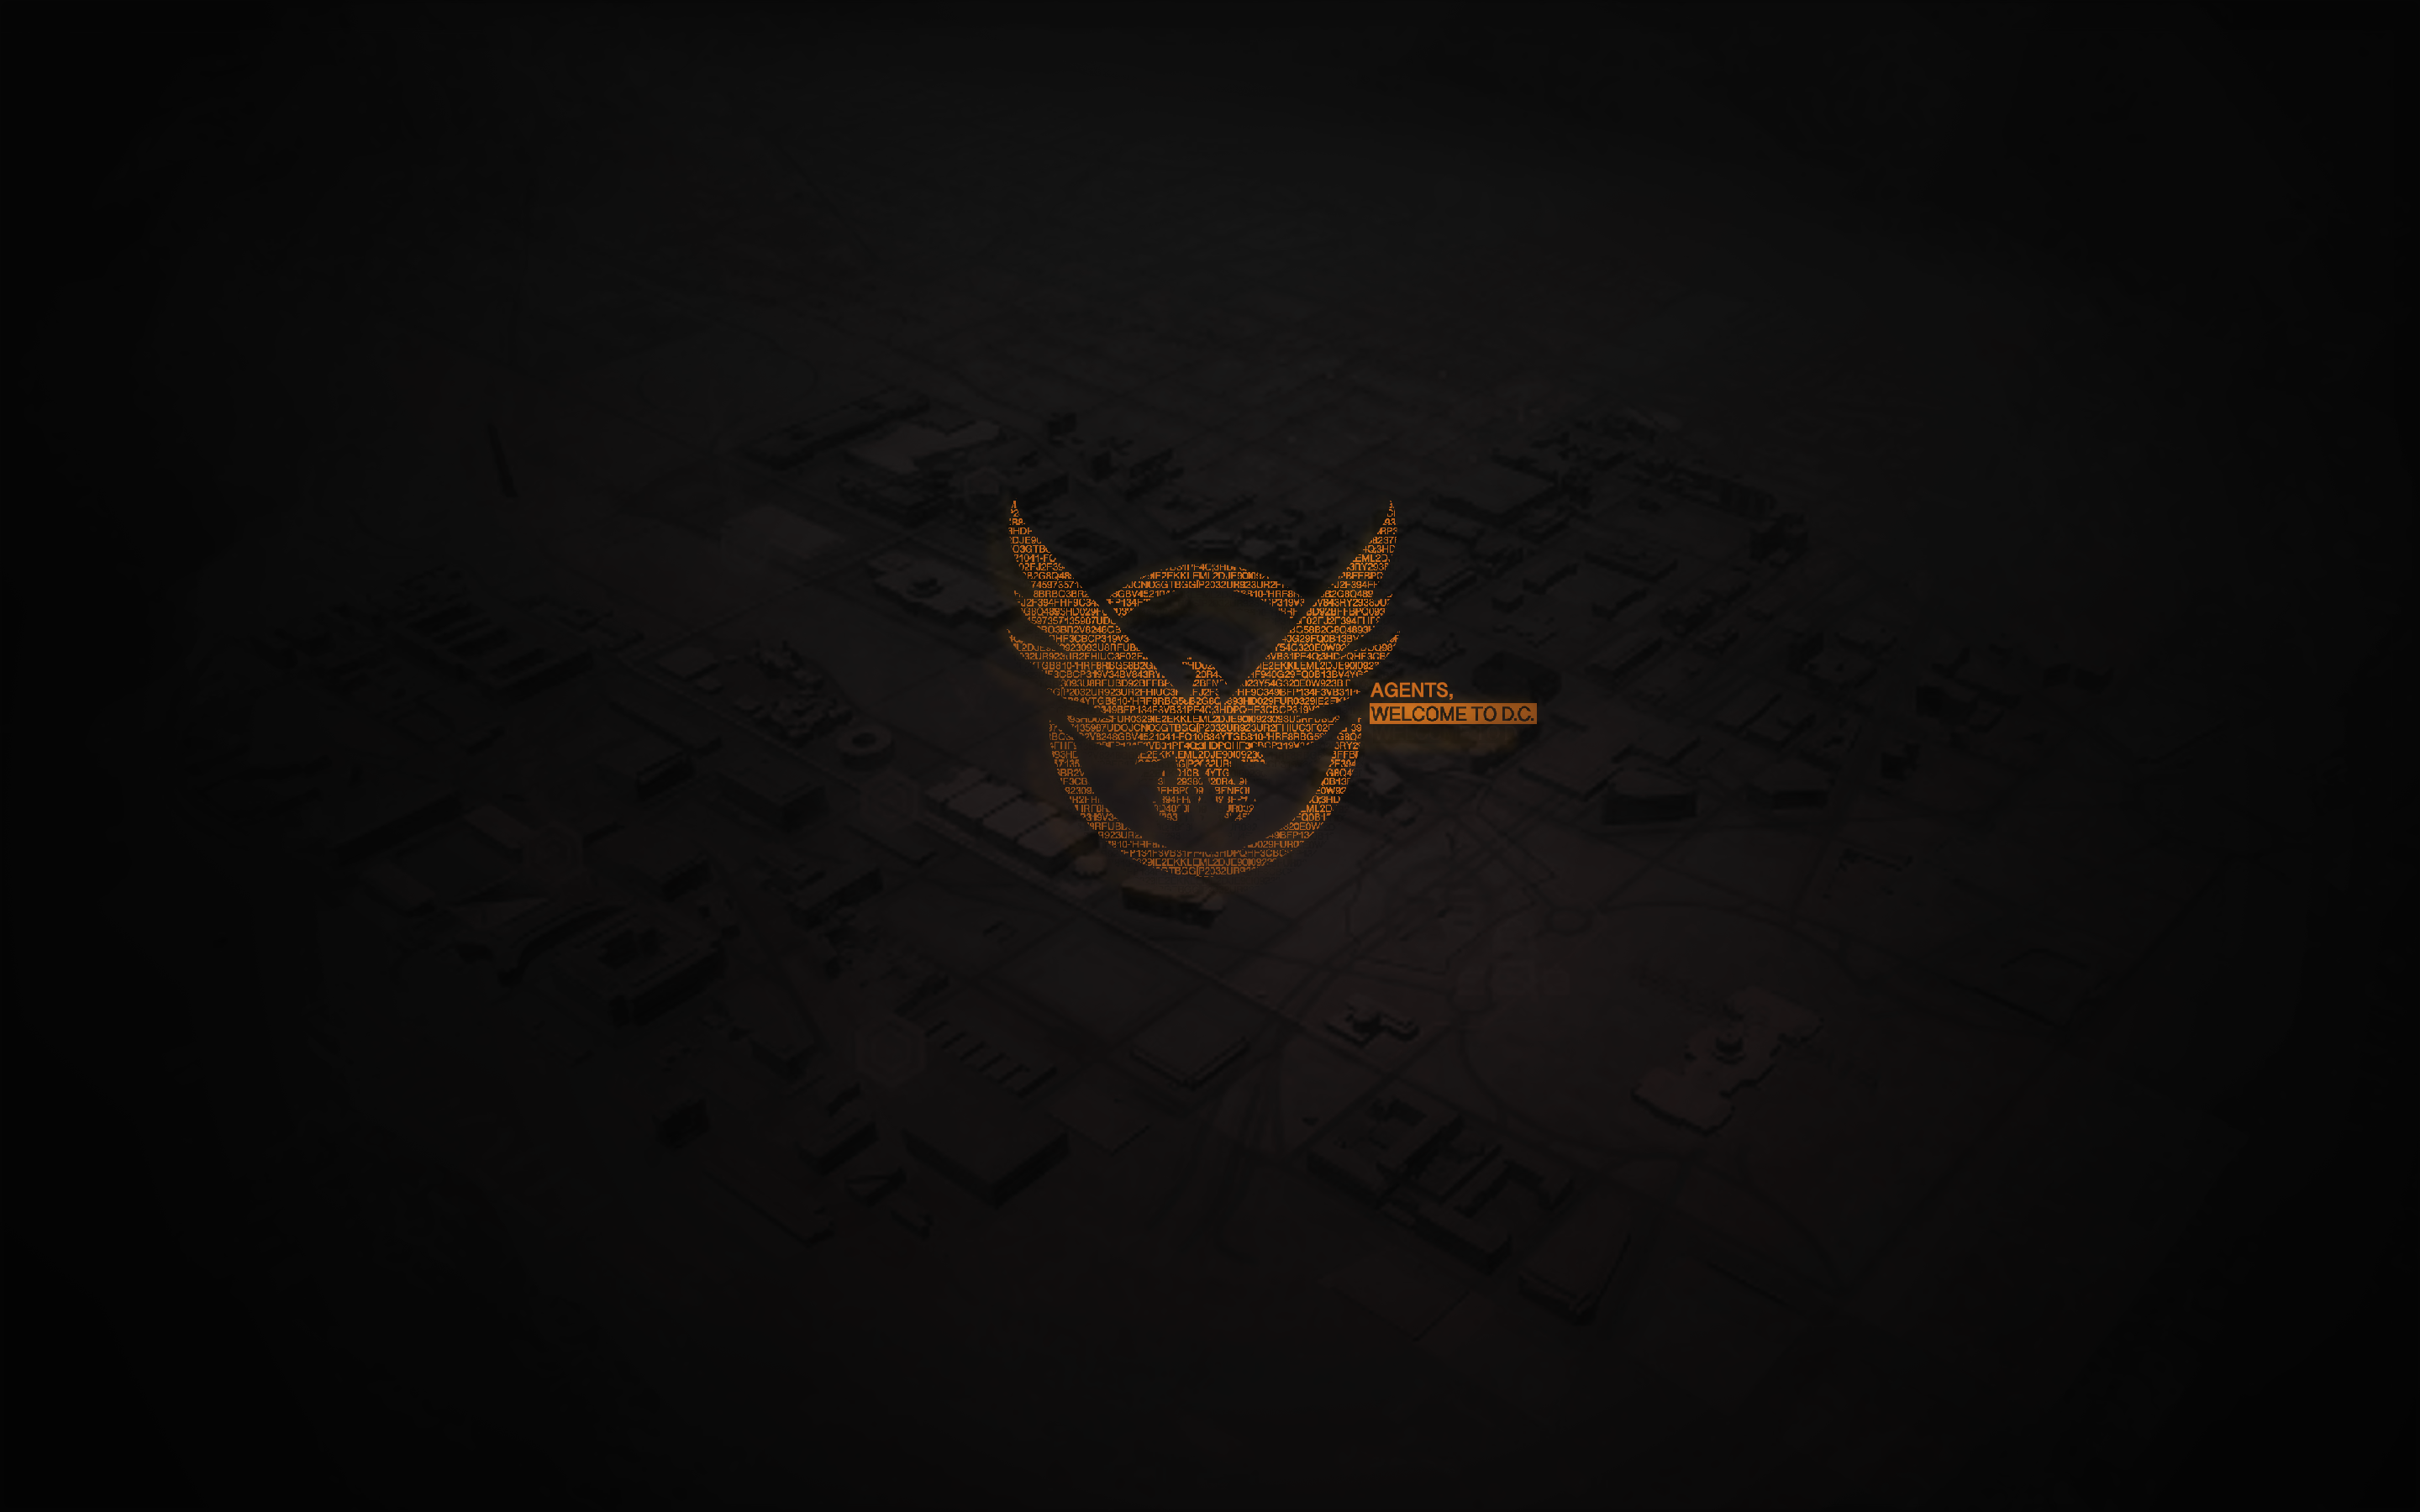 The Division 2 Wallpapers Desktop Mobile Division 2 Wallpapers Gameguidehq